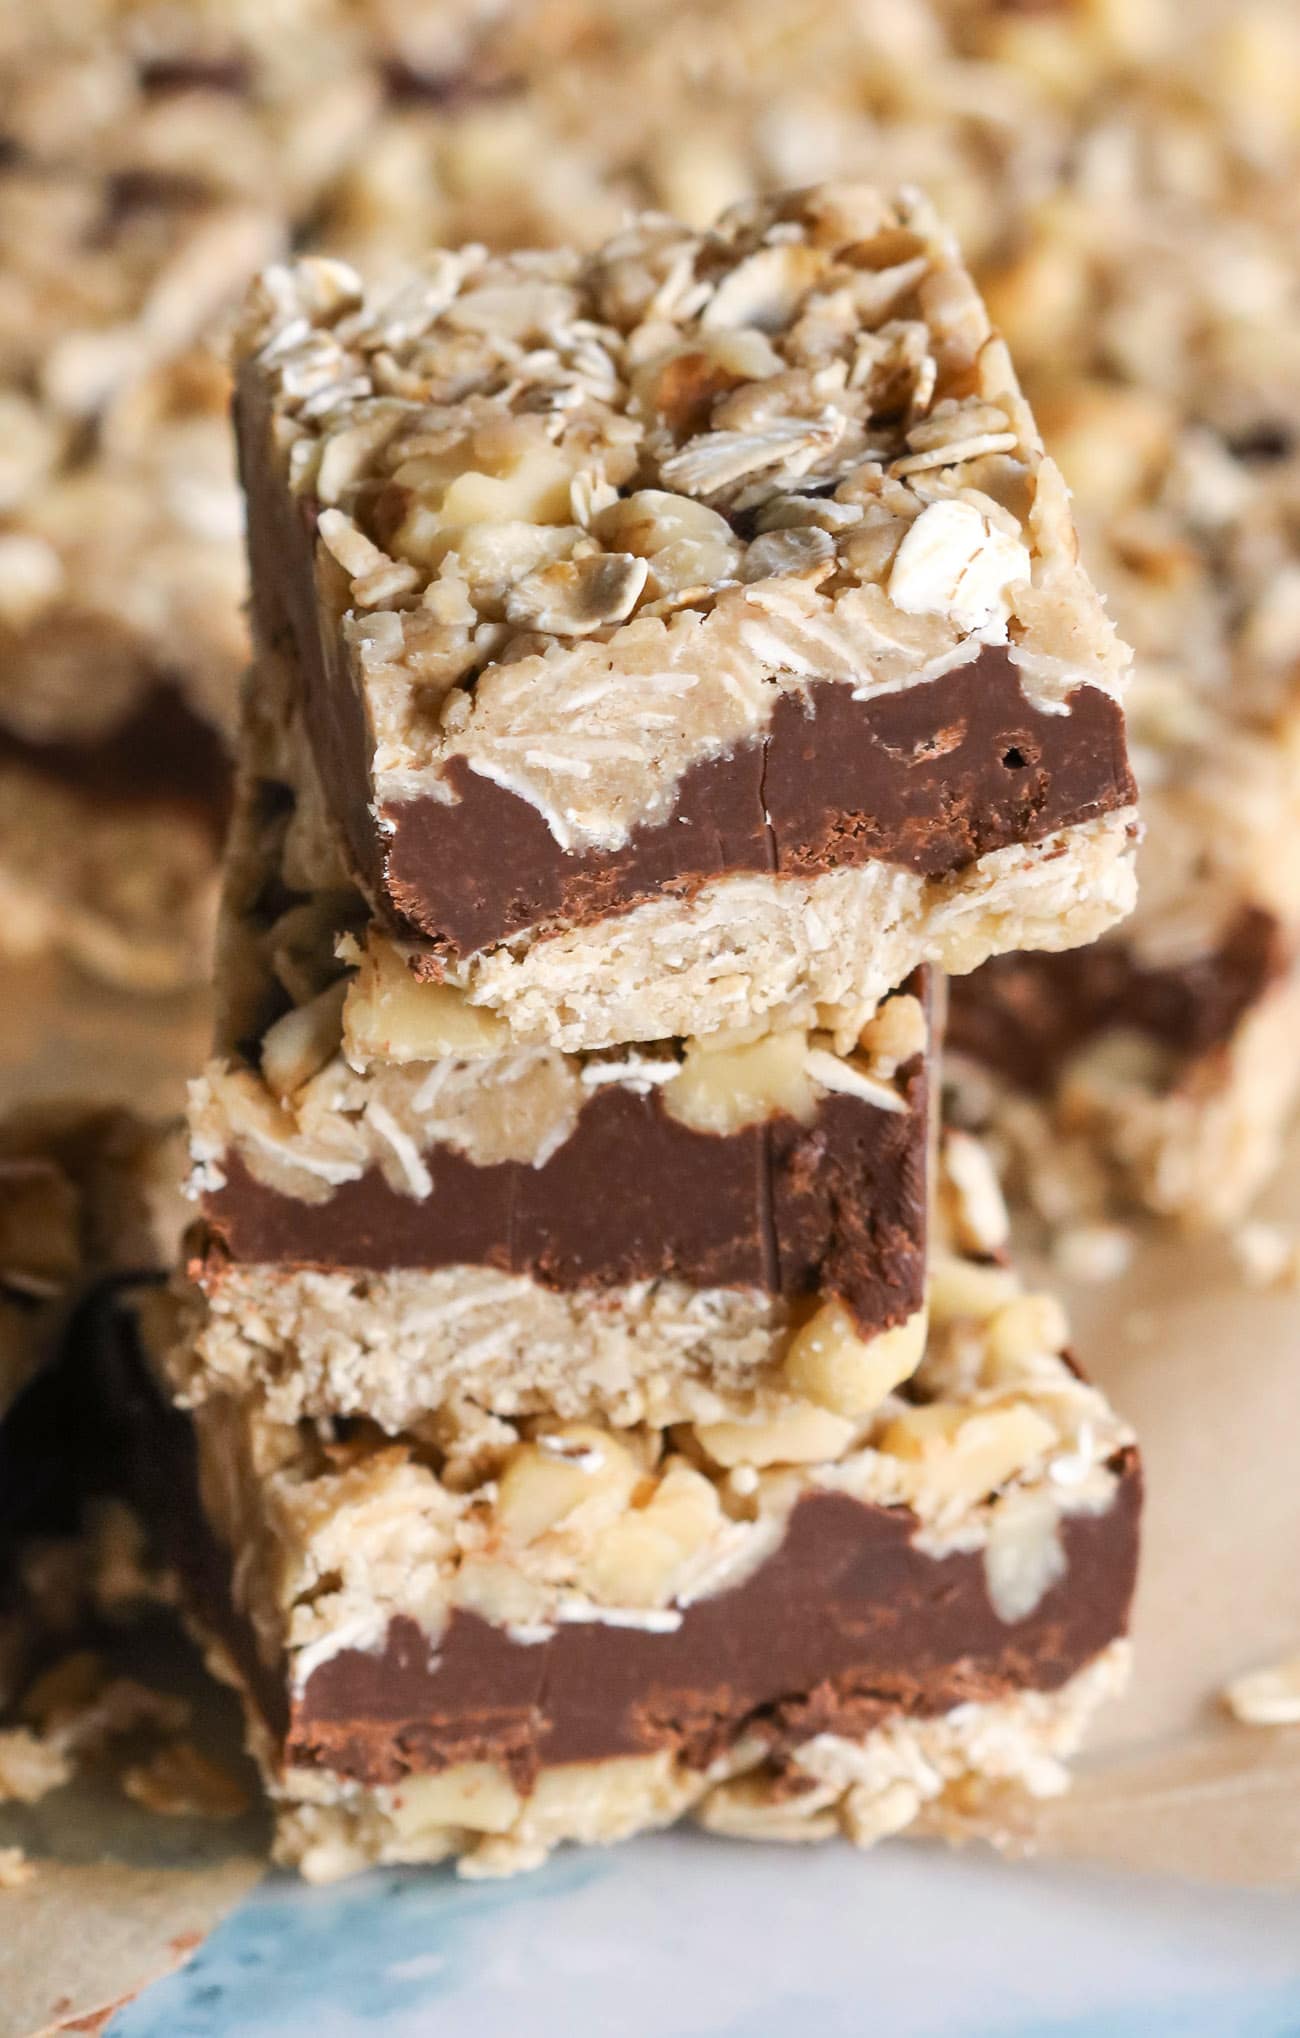 You’ve gotta try this easy no-bake Oatmeal Fudge Bars recipe! It’s the perfect breakfast or midday treat to satisfy your sweet tooth, guilt-free. Best of all, it’s gluten free, vegan, doesn’t require any baking, and only 8 ingredients!